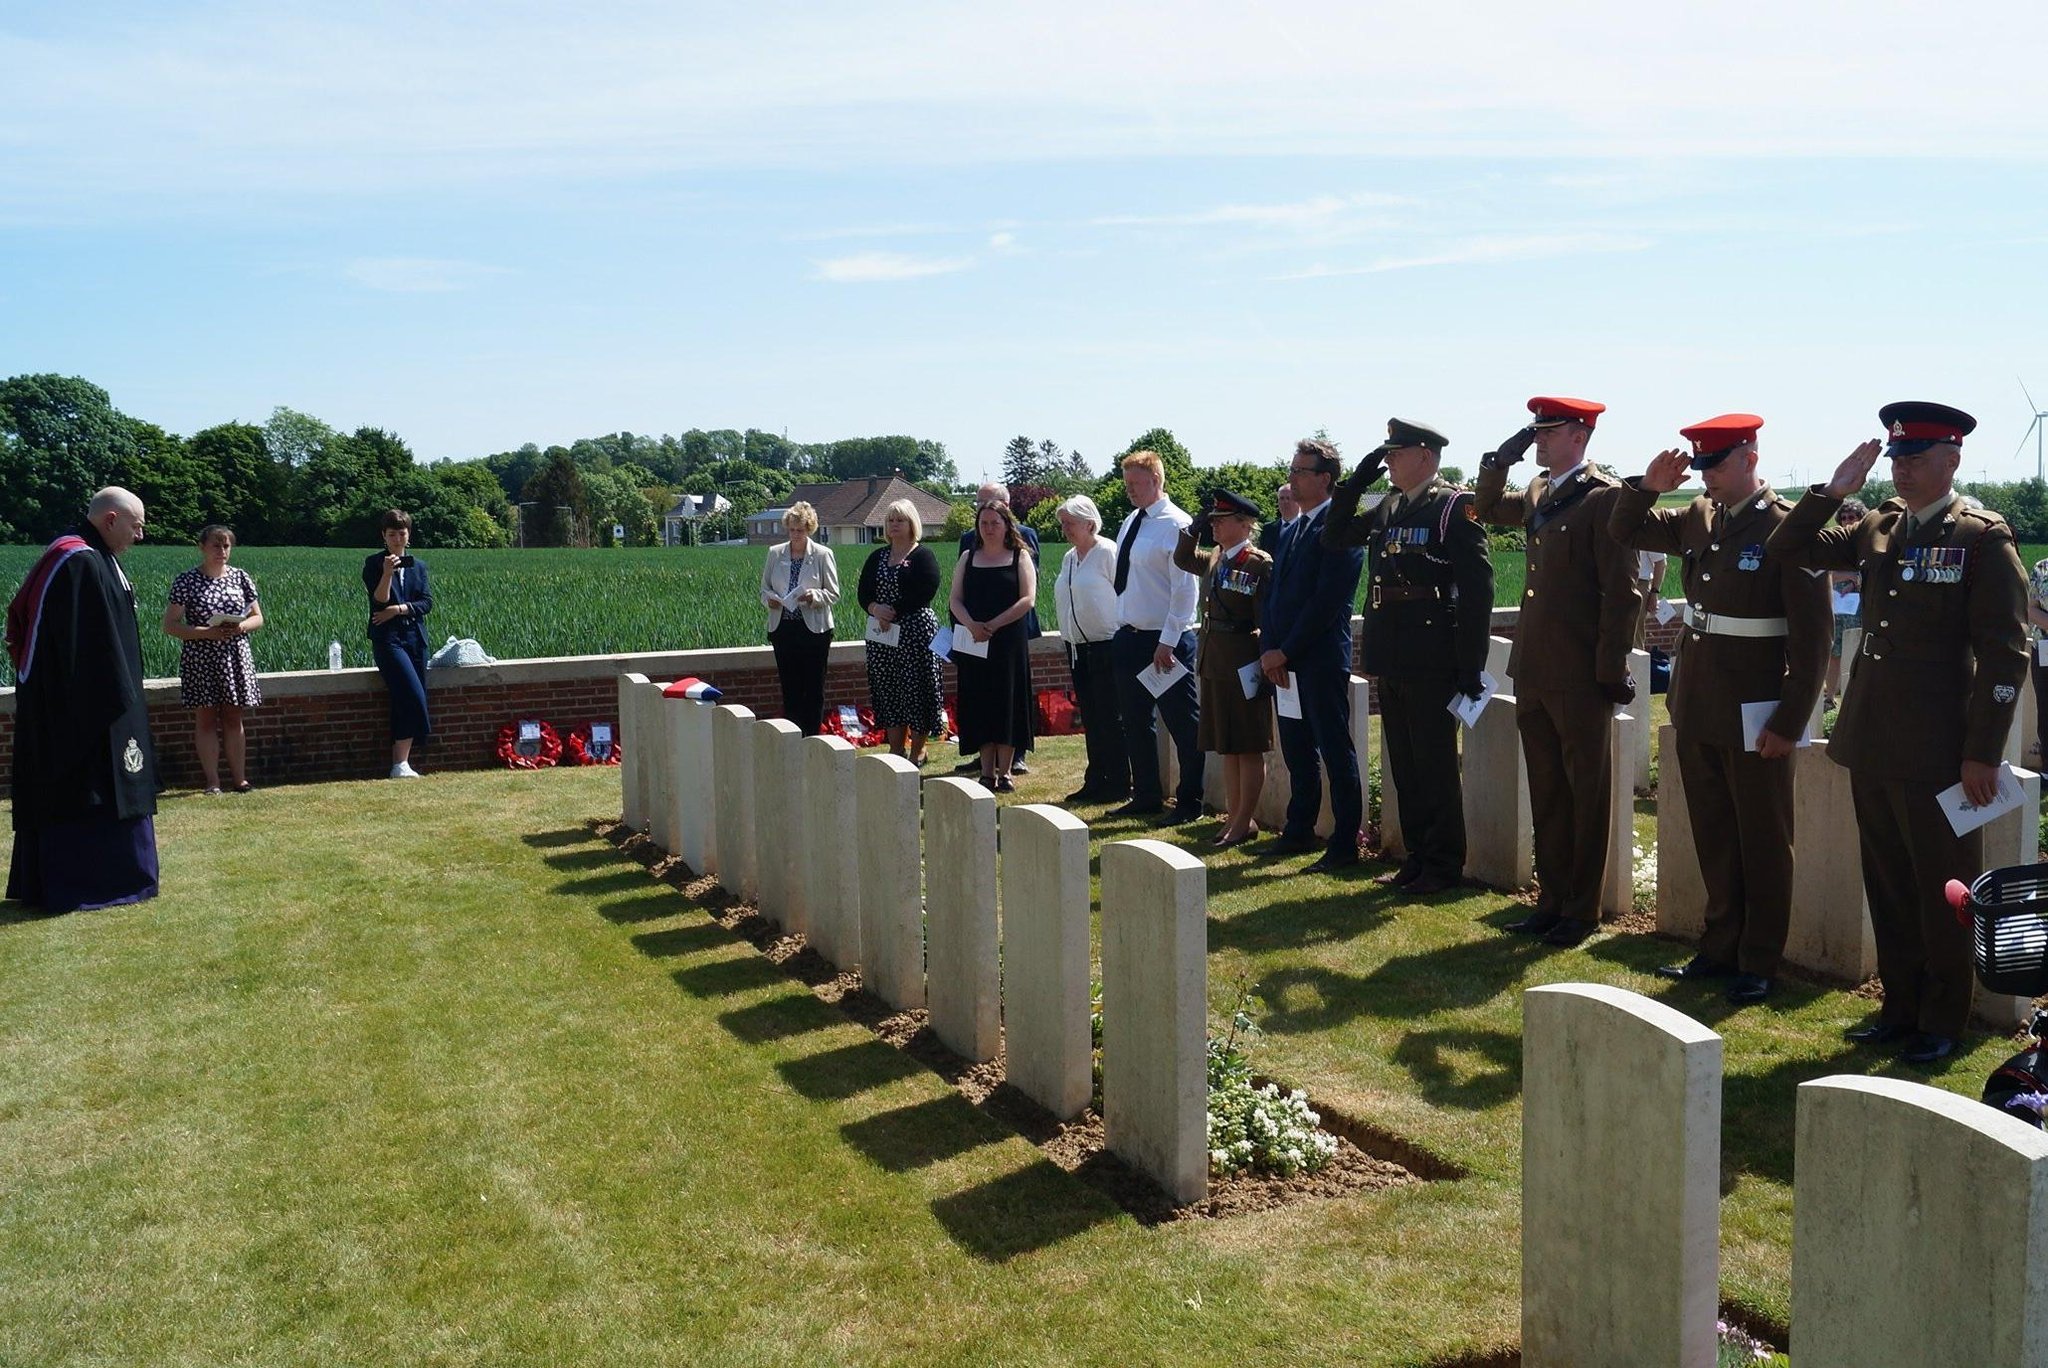 Service in France for Ulster soldier who died in WWI